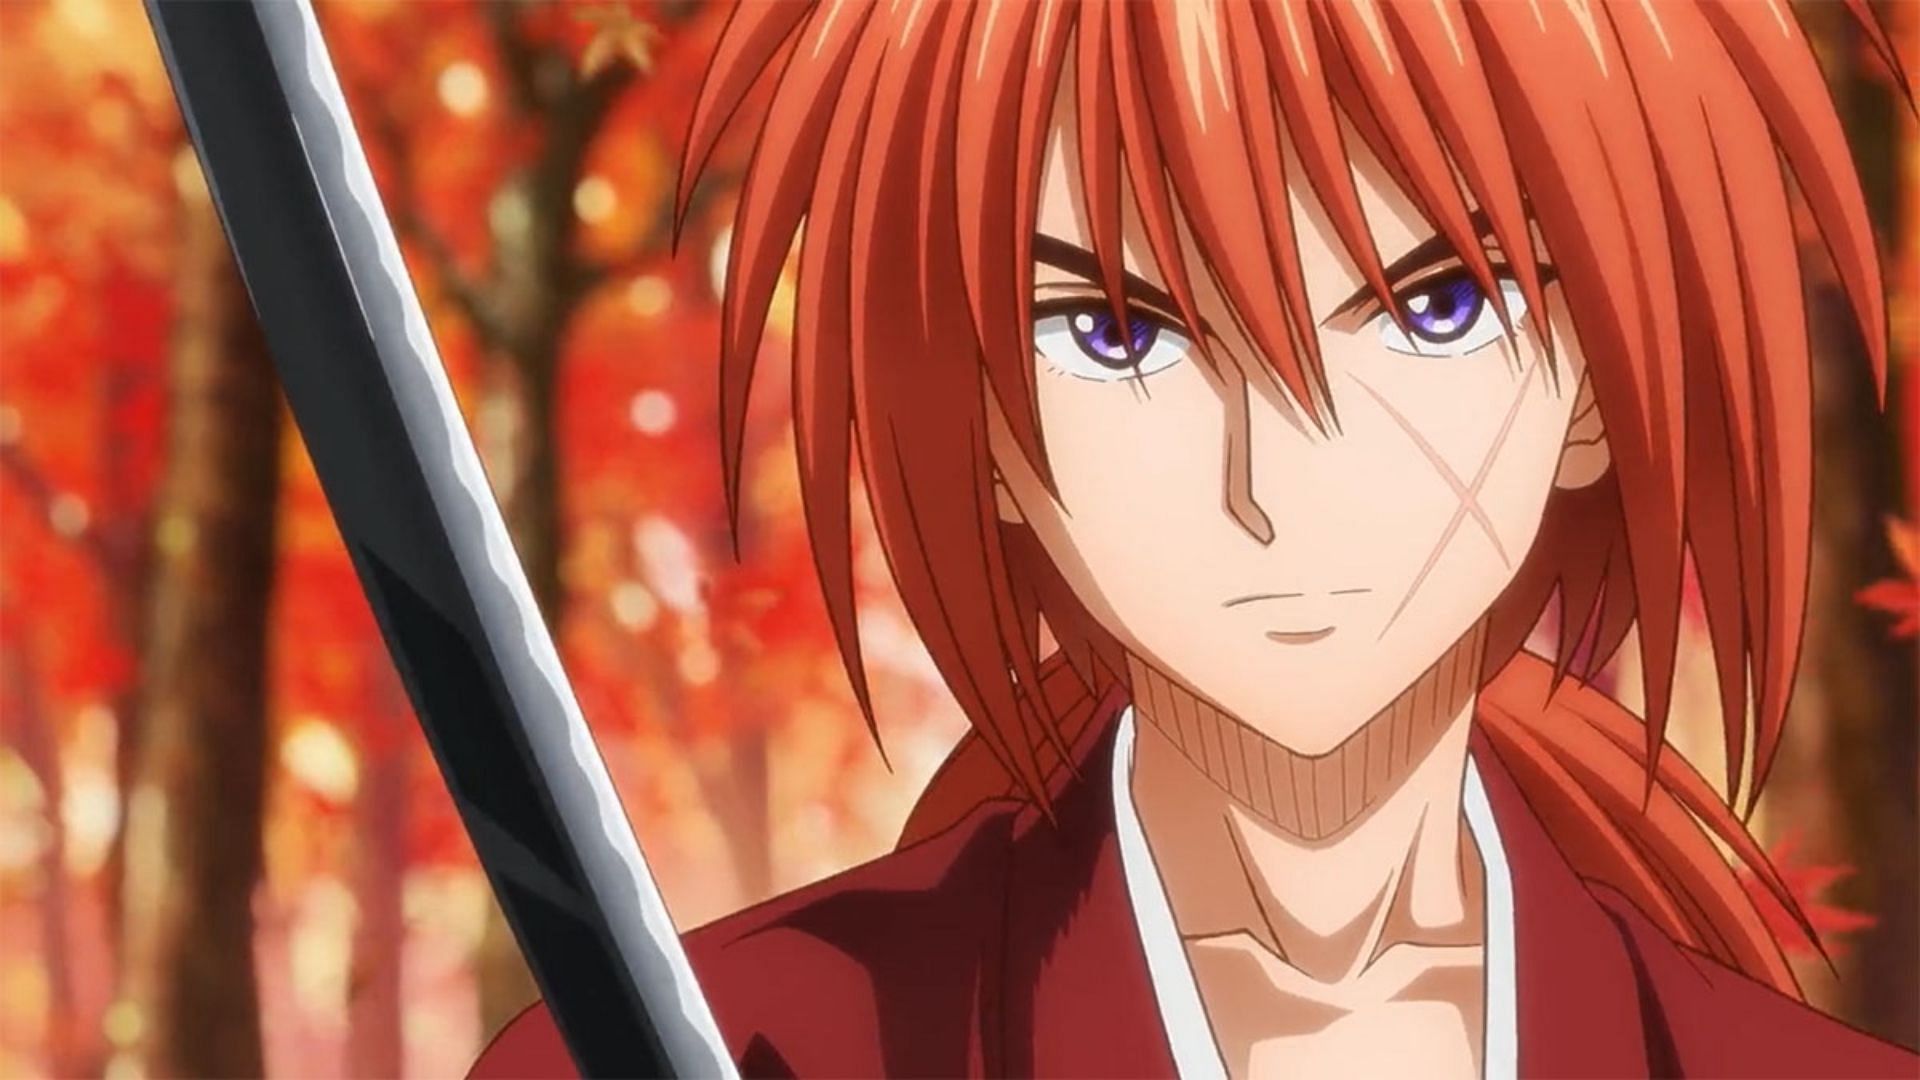 Rurouni Kenshin The Beginning How Does the Film Differ to the Manga